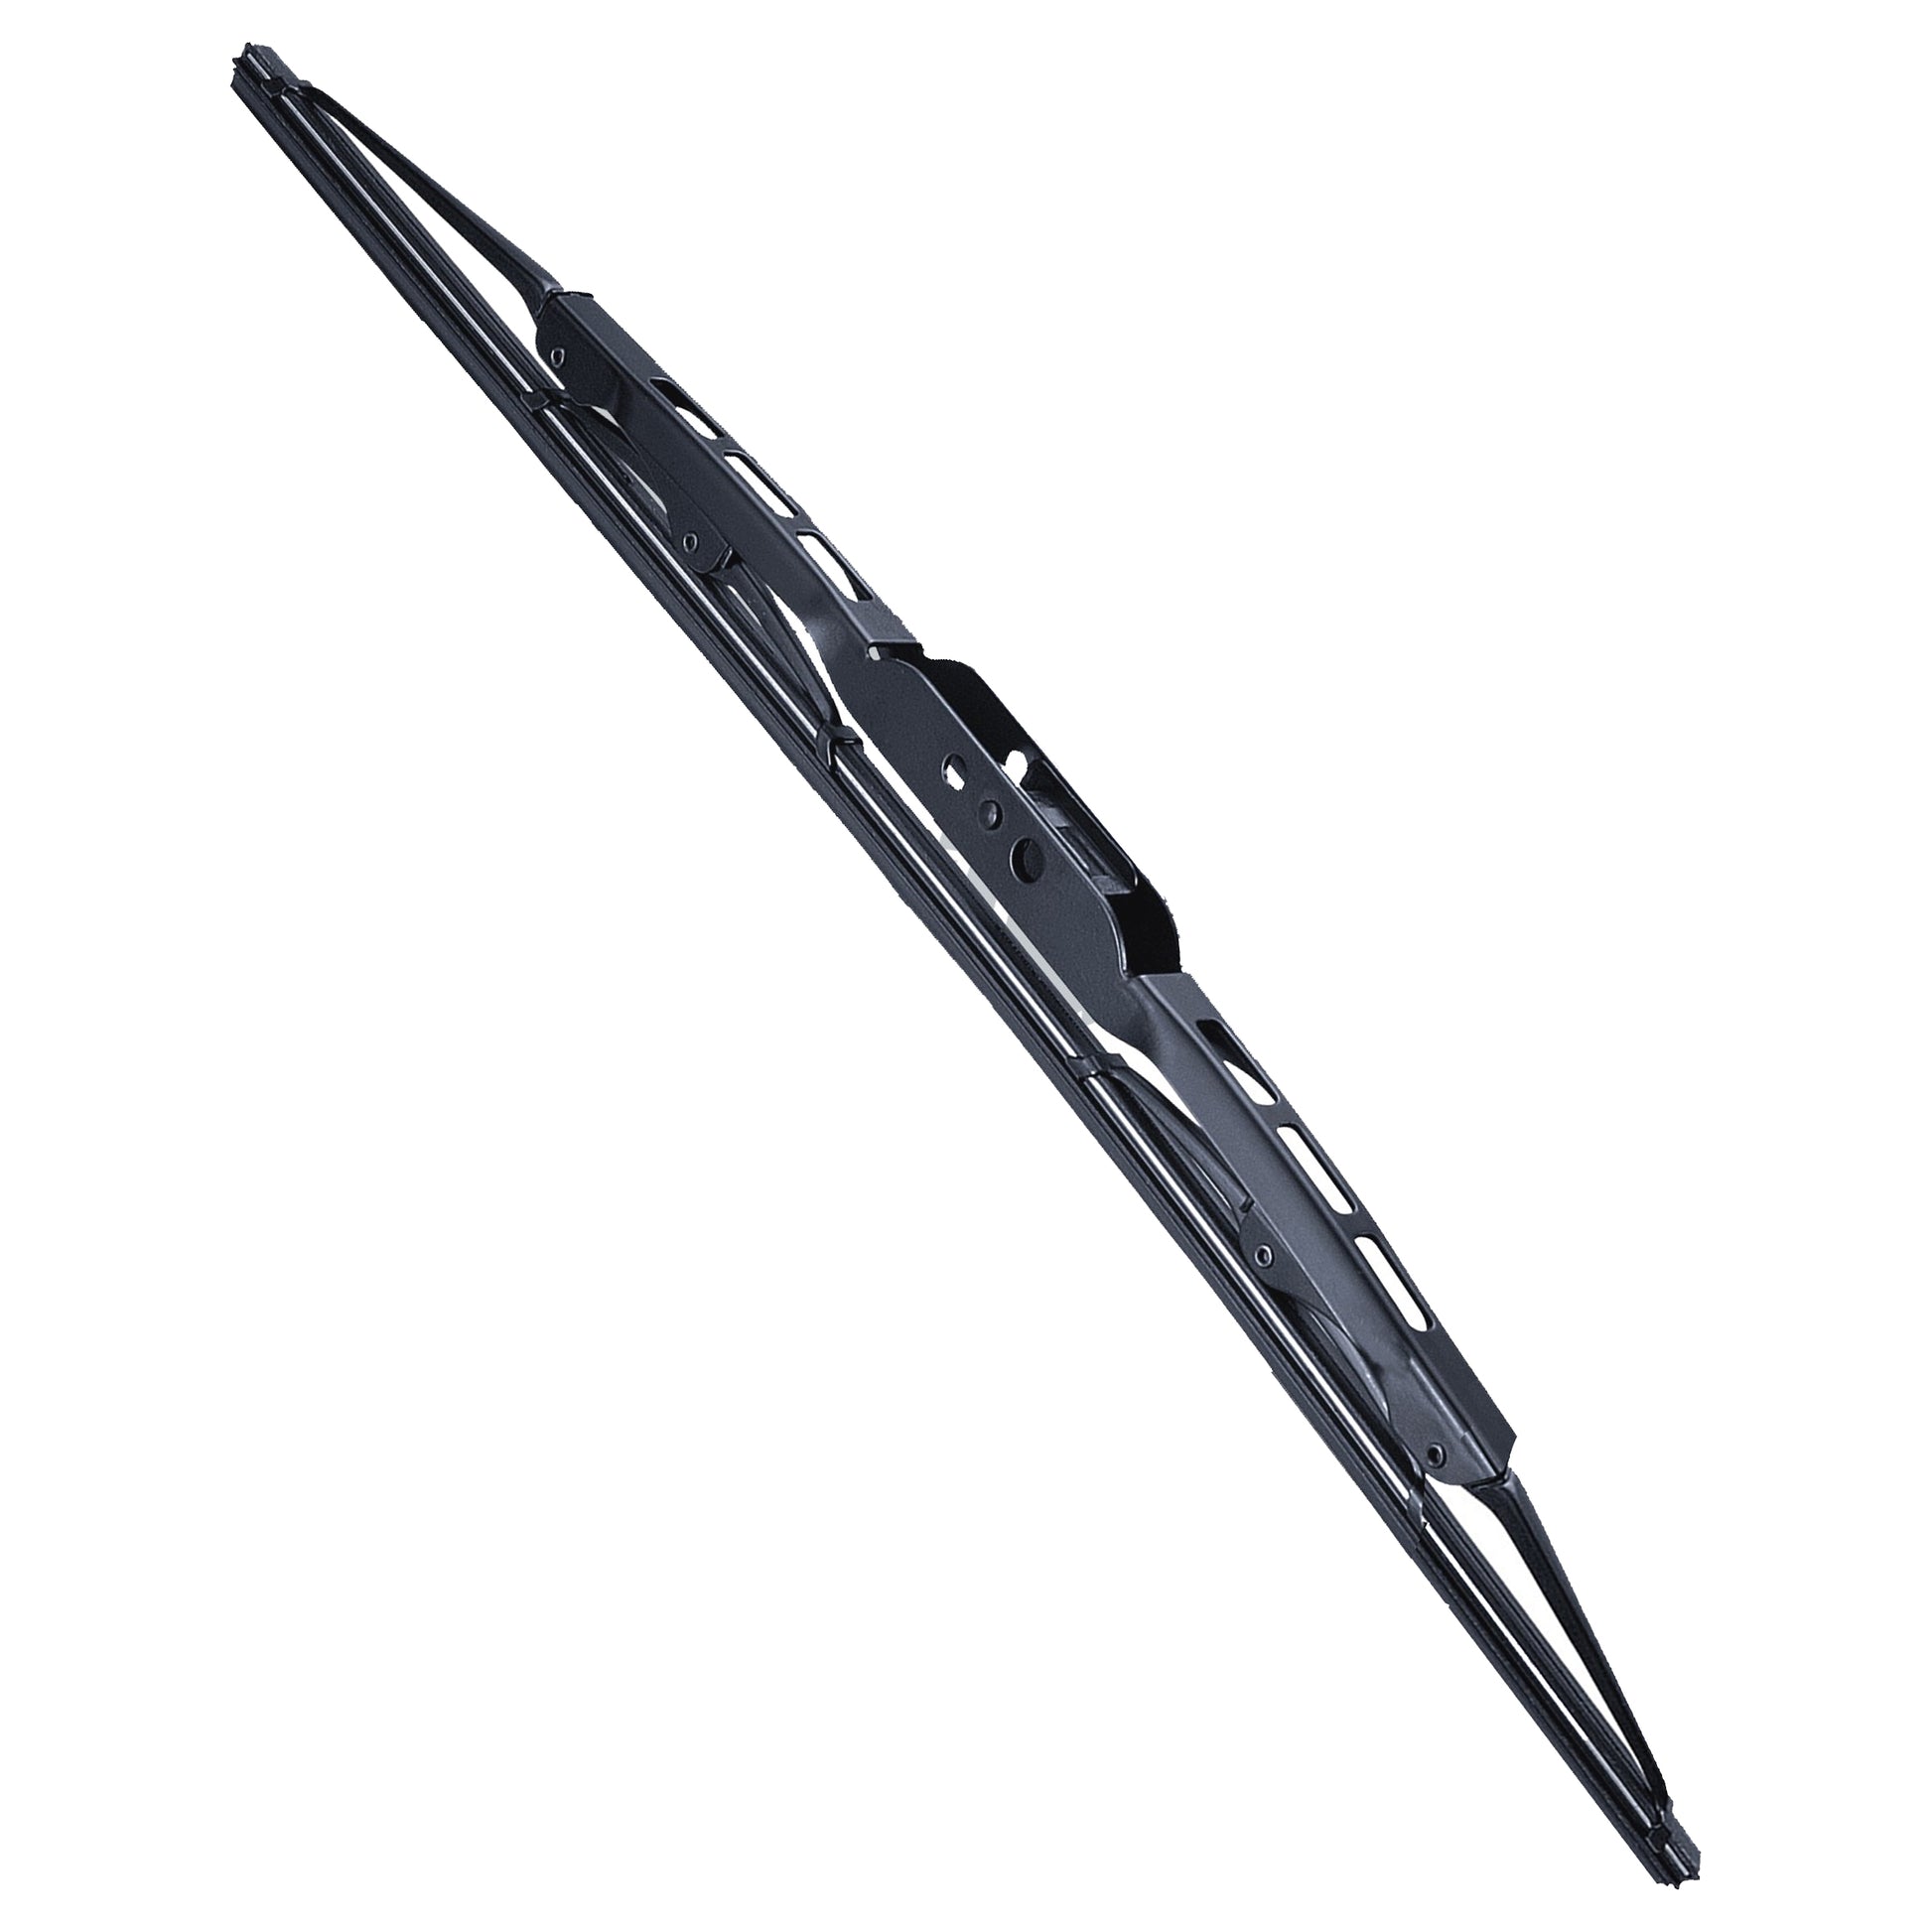 SEAT IBIZA 6L LATE AND 6J EARLY 3 DOOR Hatchback May 2006 to Jun 2016Rear Wiper Blade 